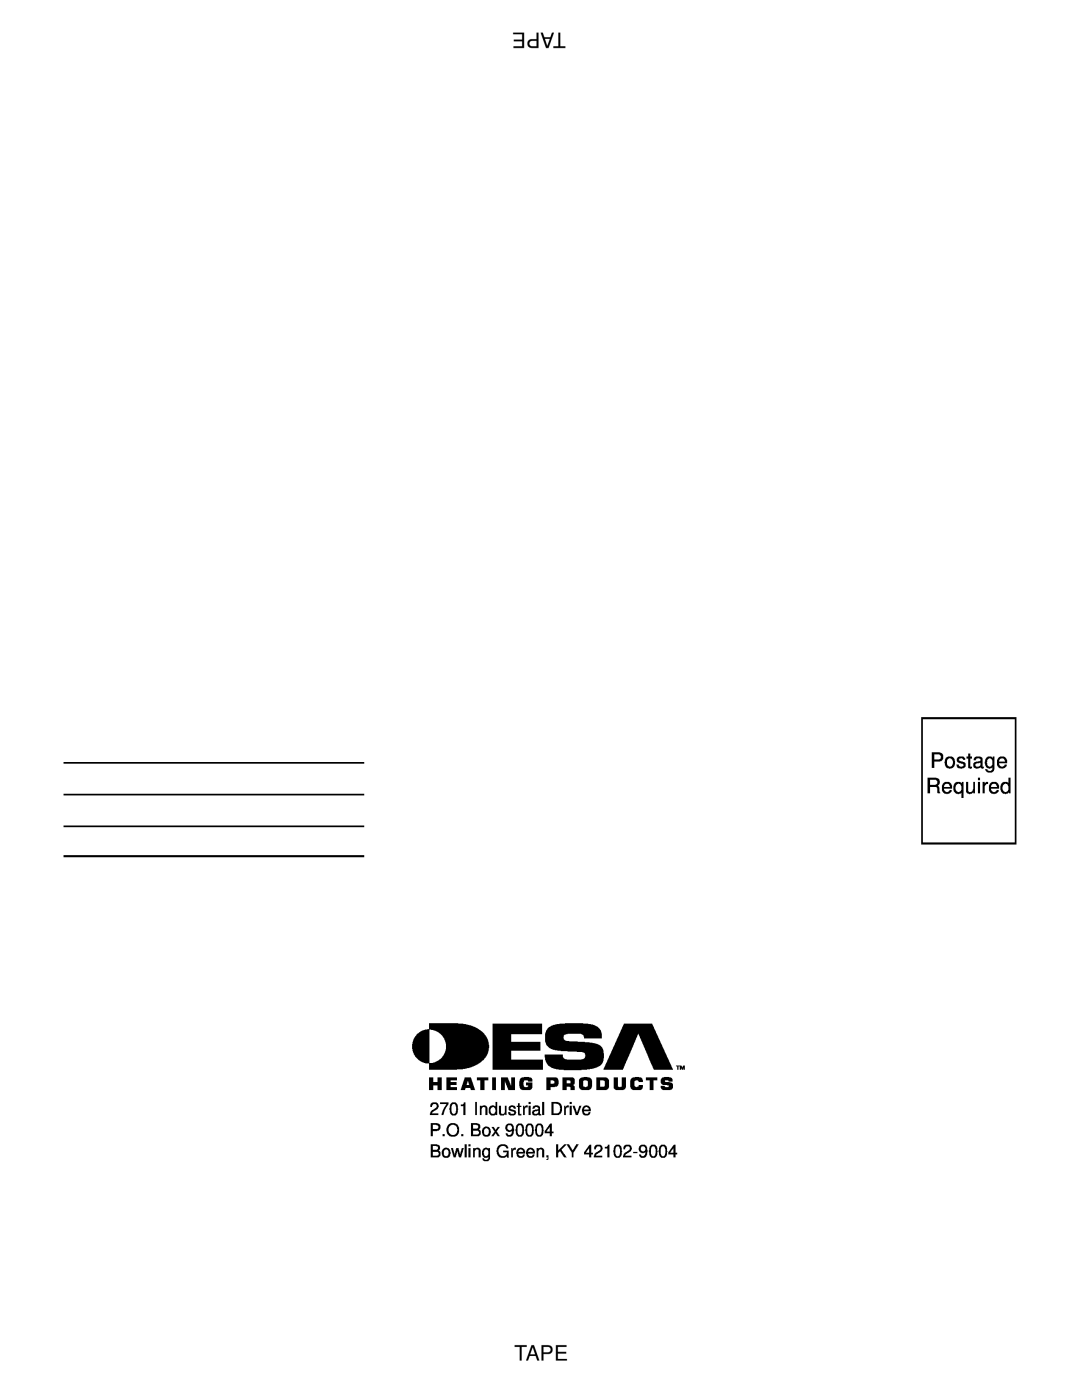 Desa VSGF33PRA installation manual Tape, Postage Required, Industrial Drive P.O. Box Bowling Green, KY 